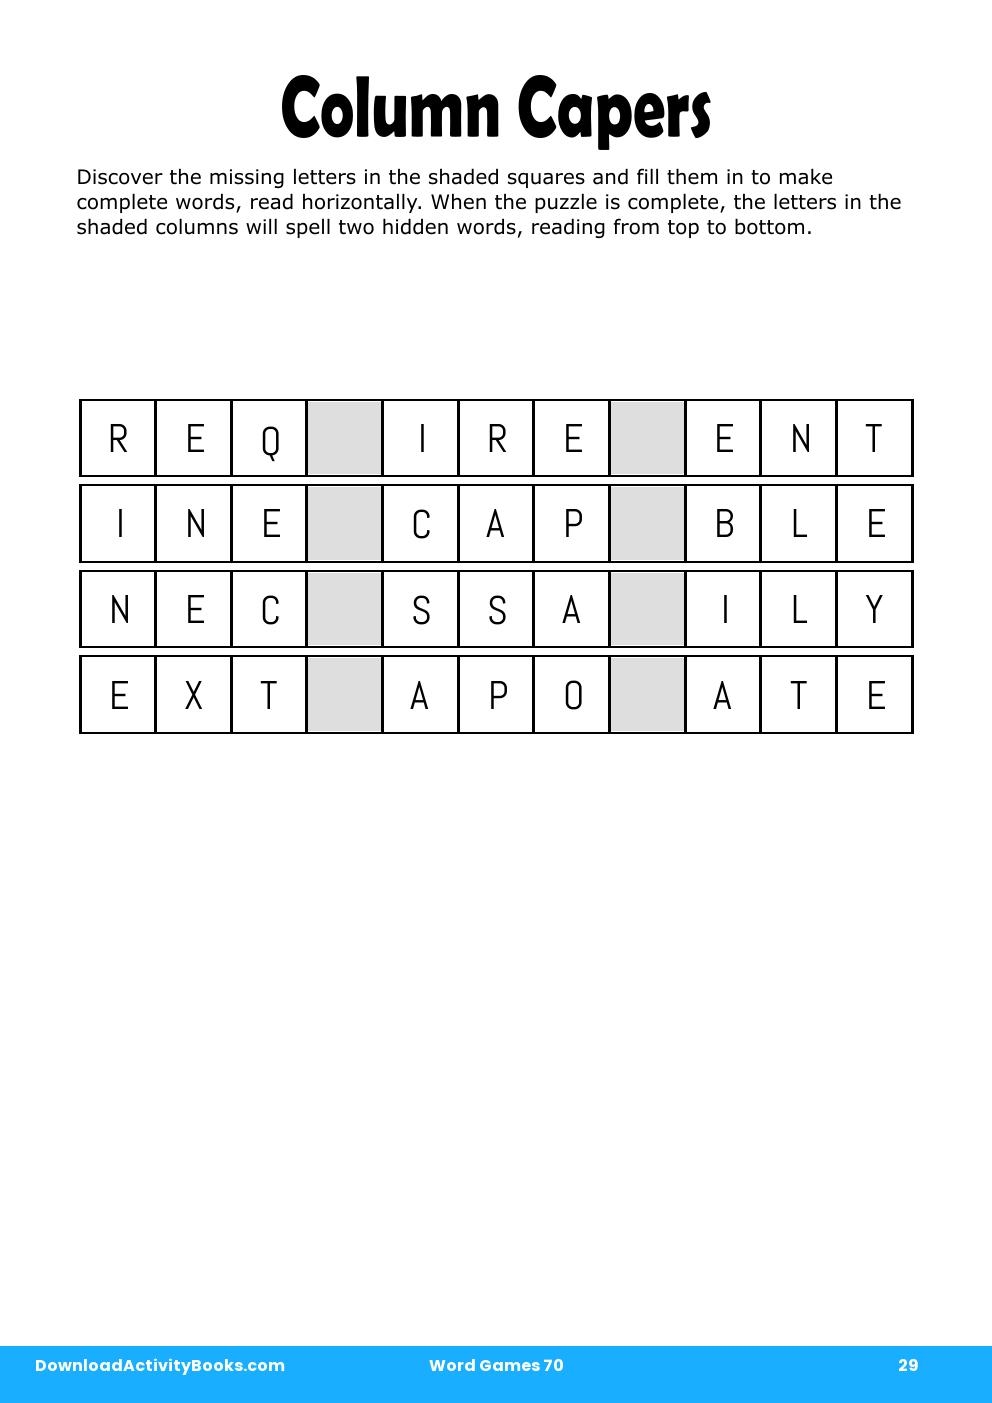 Column Capers in Word Games 70